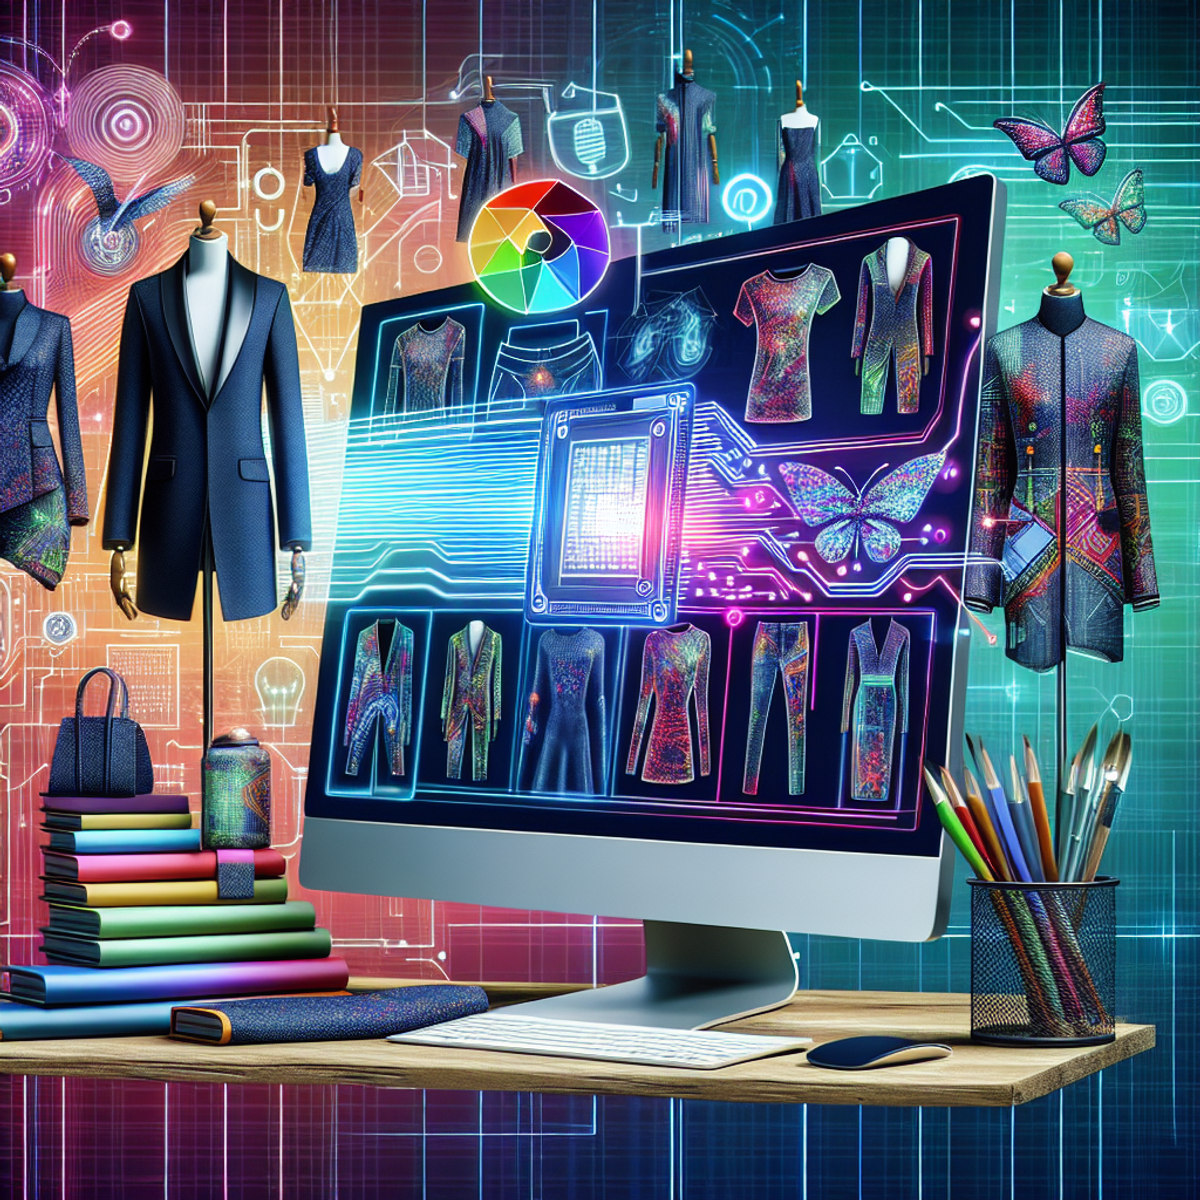 A fashion designer's portfolio displayed on a modern computer screen, with vibrant garment interpretations on one side and AI-generated clothing ideas in visual patterns, colors, and symbols on the other.